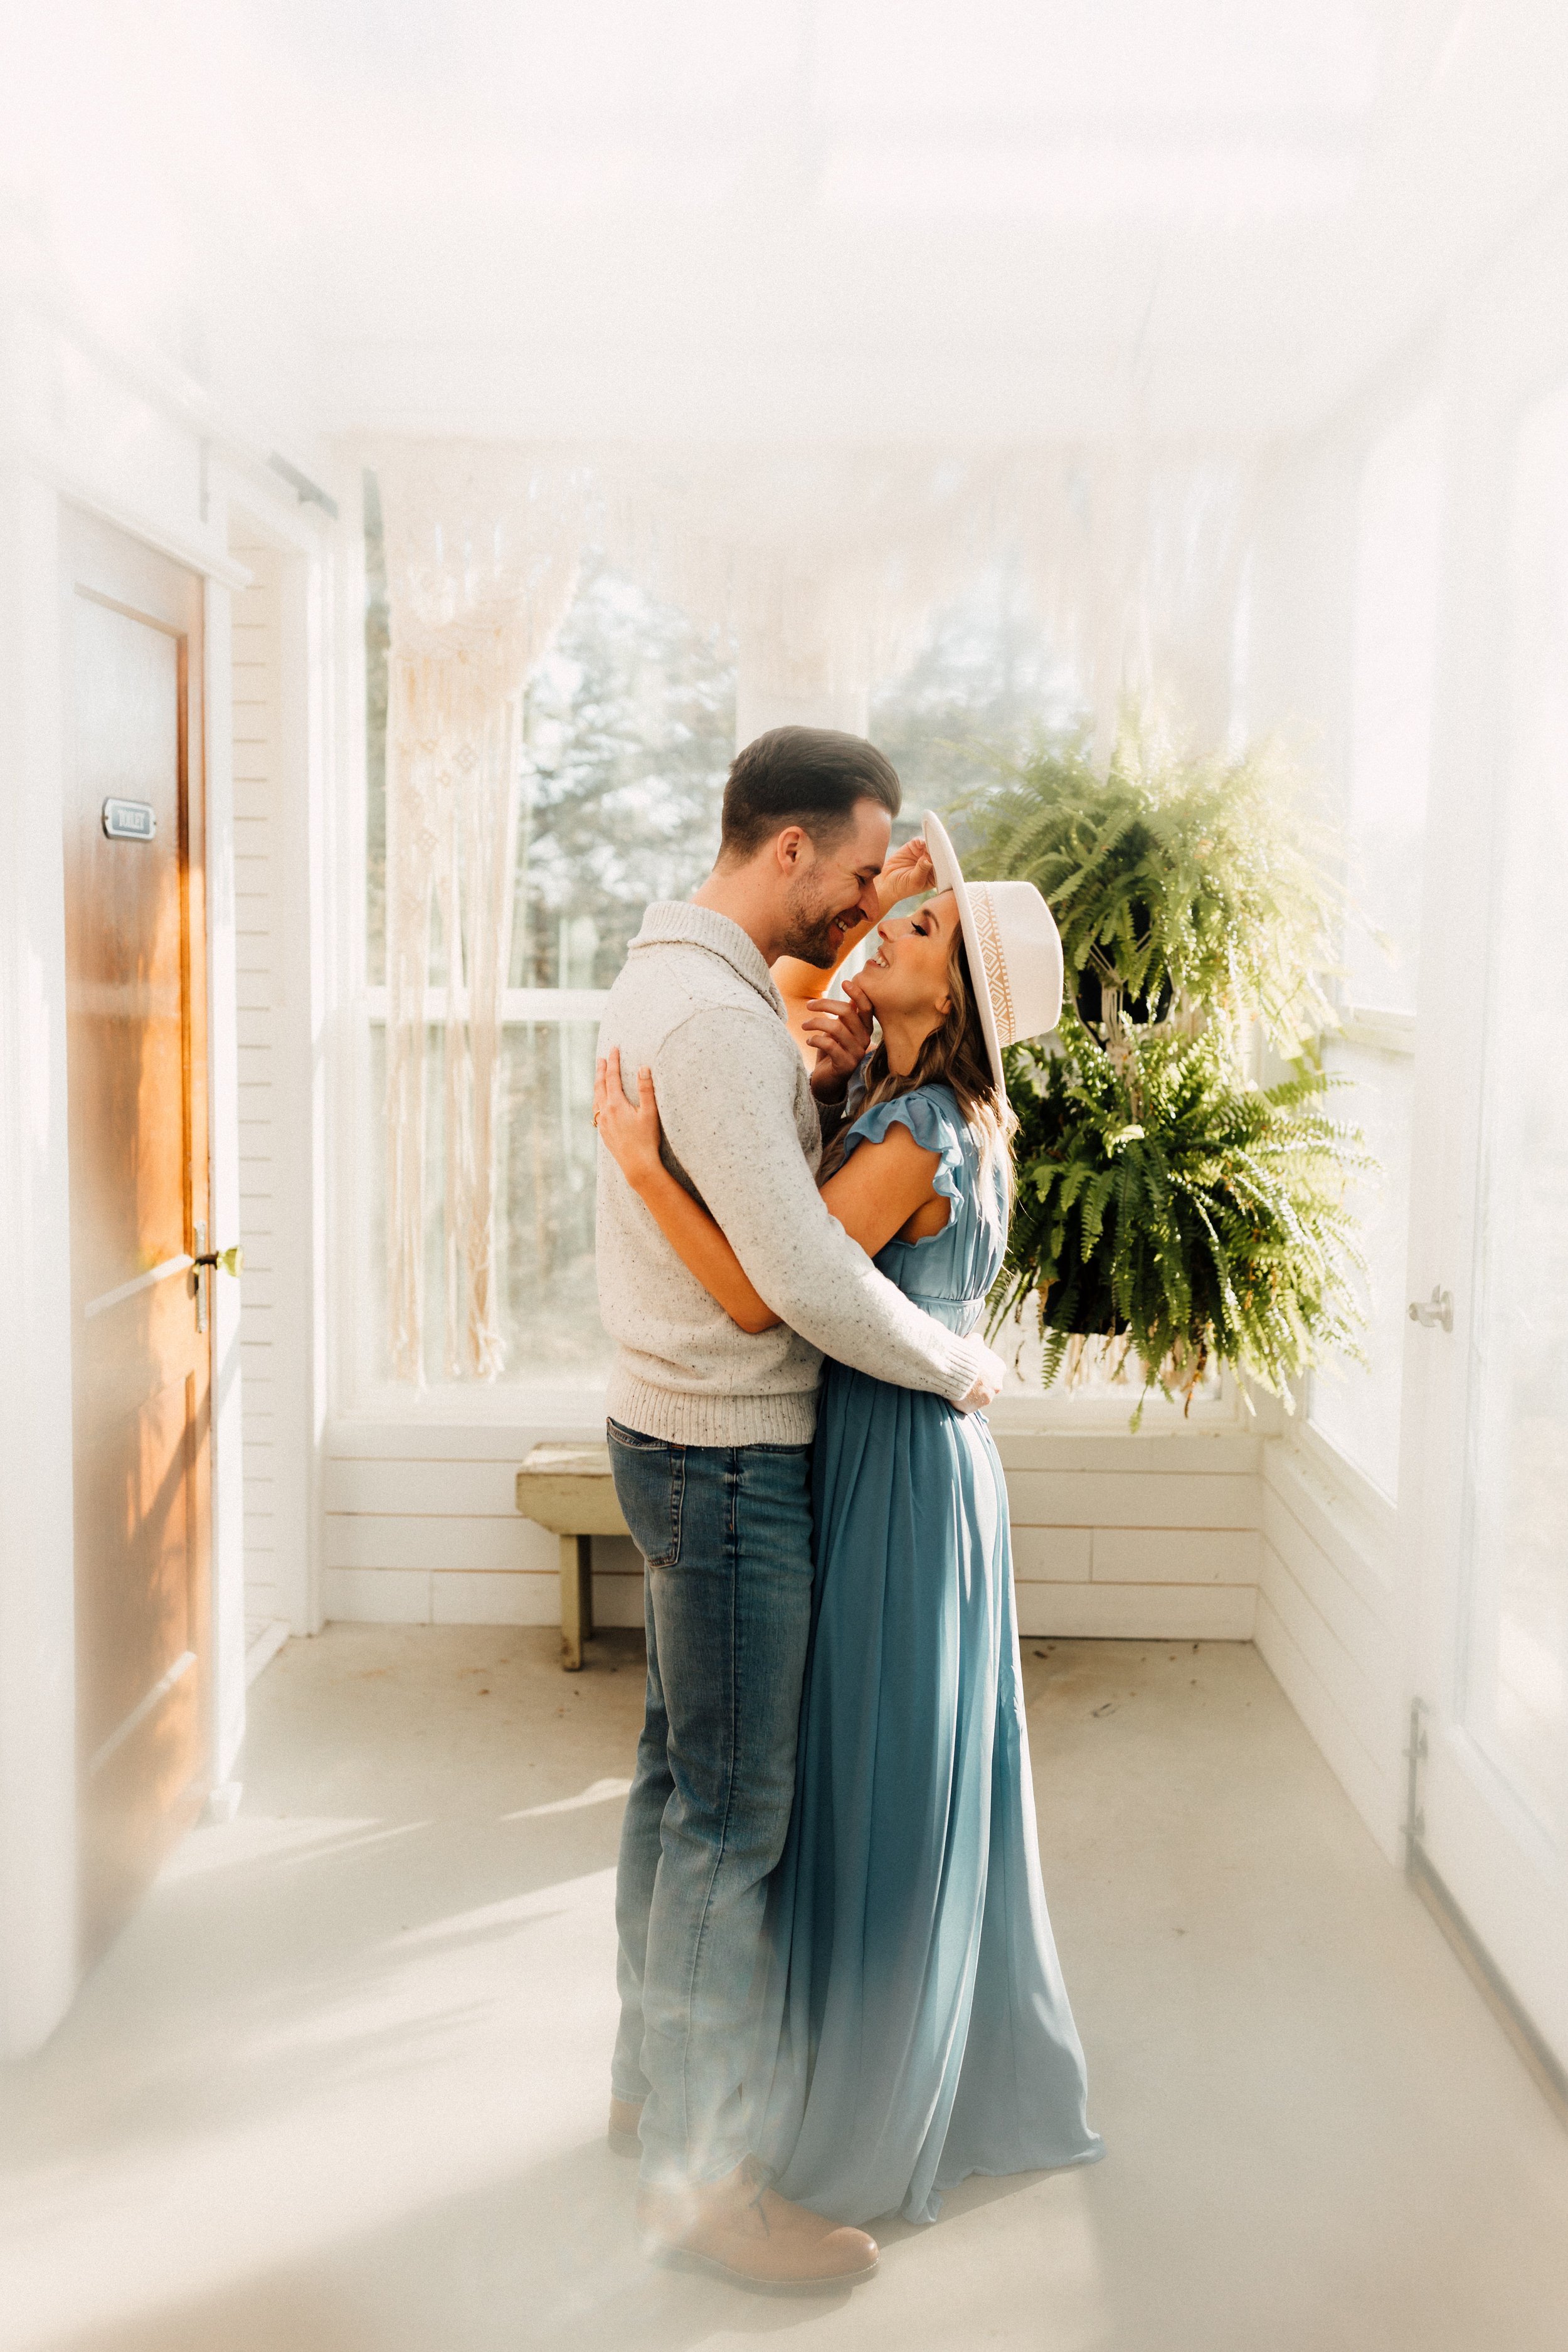 Laura_Ben_Engagment_Session_Winterset_Des_moines_Iowa_Couples_Photographer_Iris_Aisle_Cabin_Conservatory_Candid_Snow_Day_Winter_KMP_Photography-9039.jpg